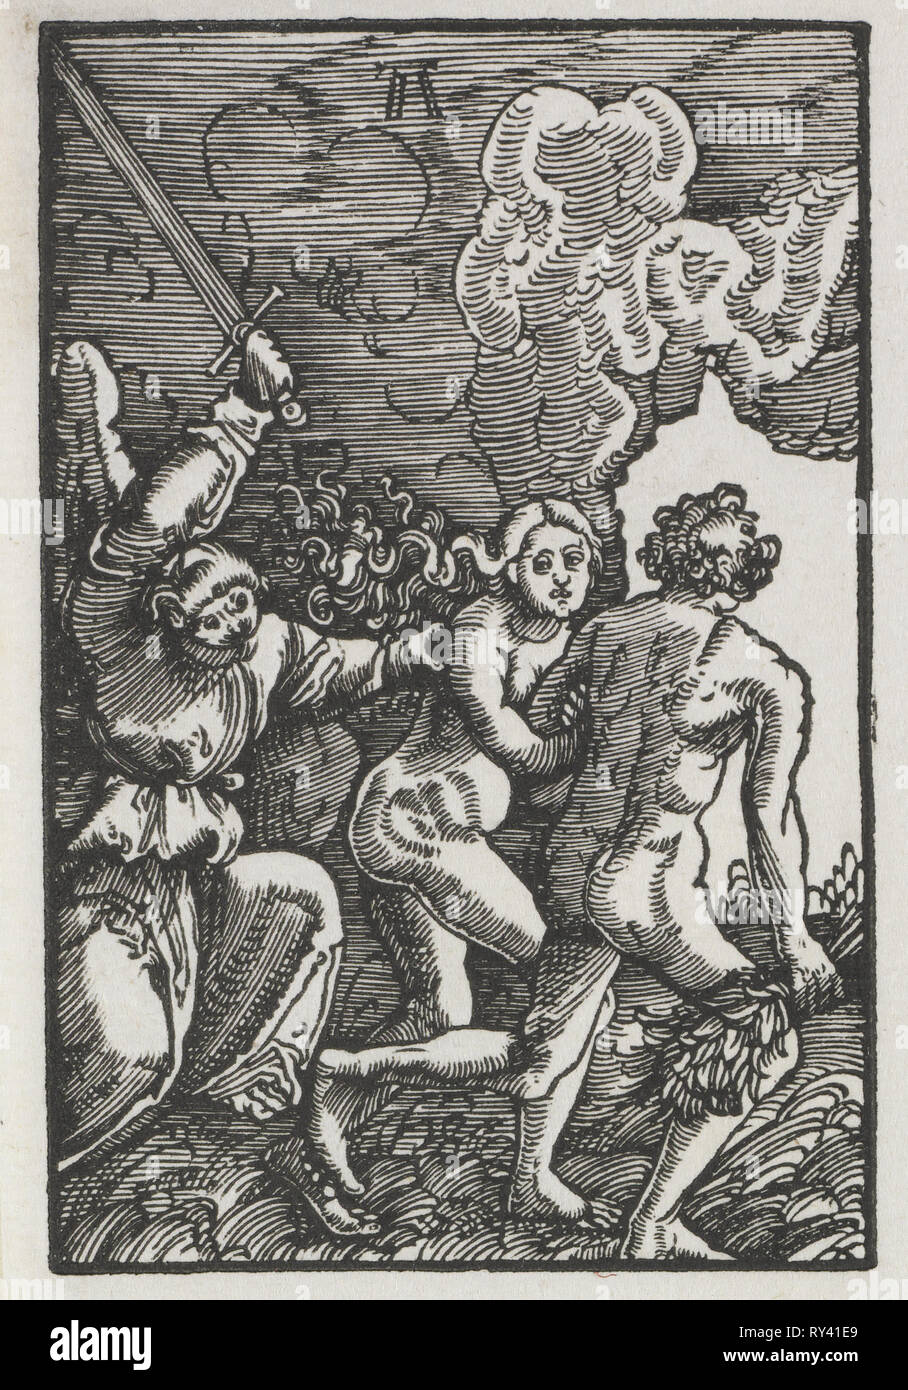 The Fall and Redemption of Man:  The Expulsion from Eden, c. 1515. Albrecht Altdorfer (German, c. 1480-1538). Woodcut Stock Photo